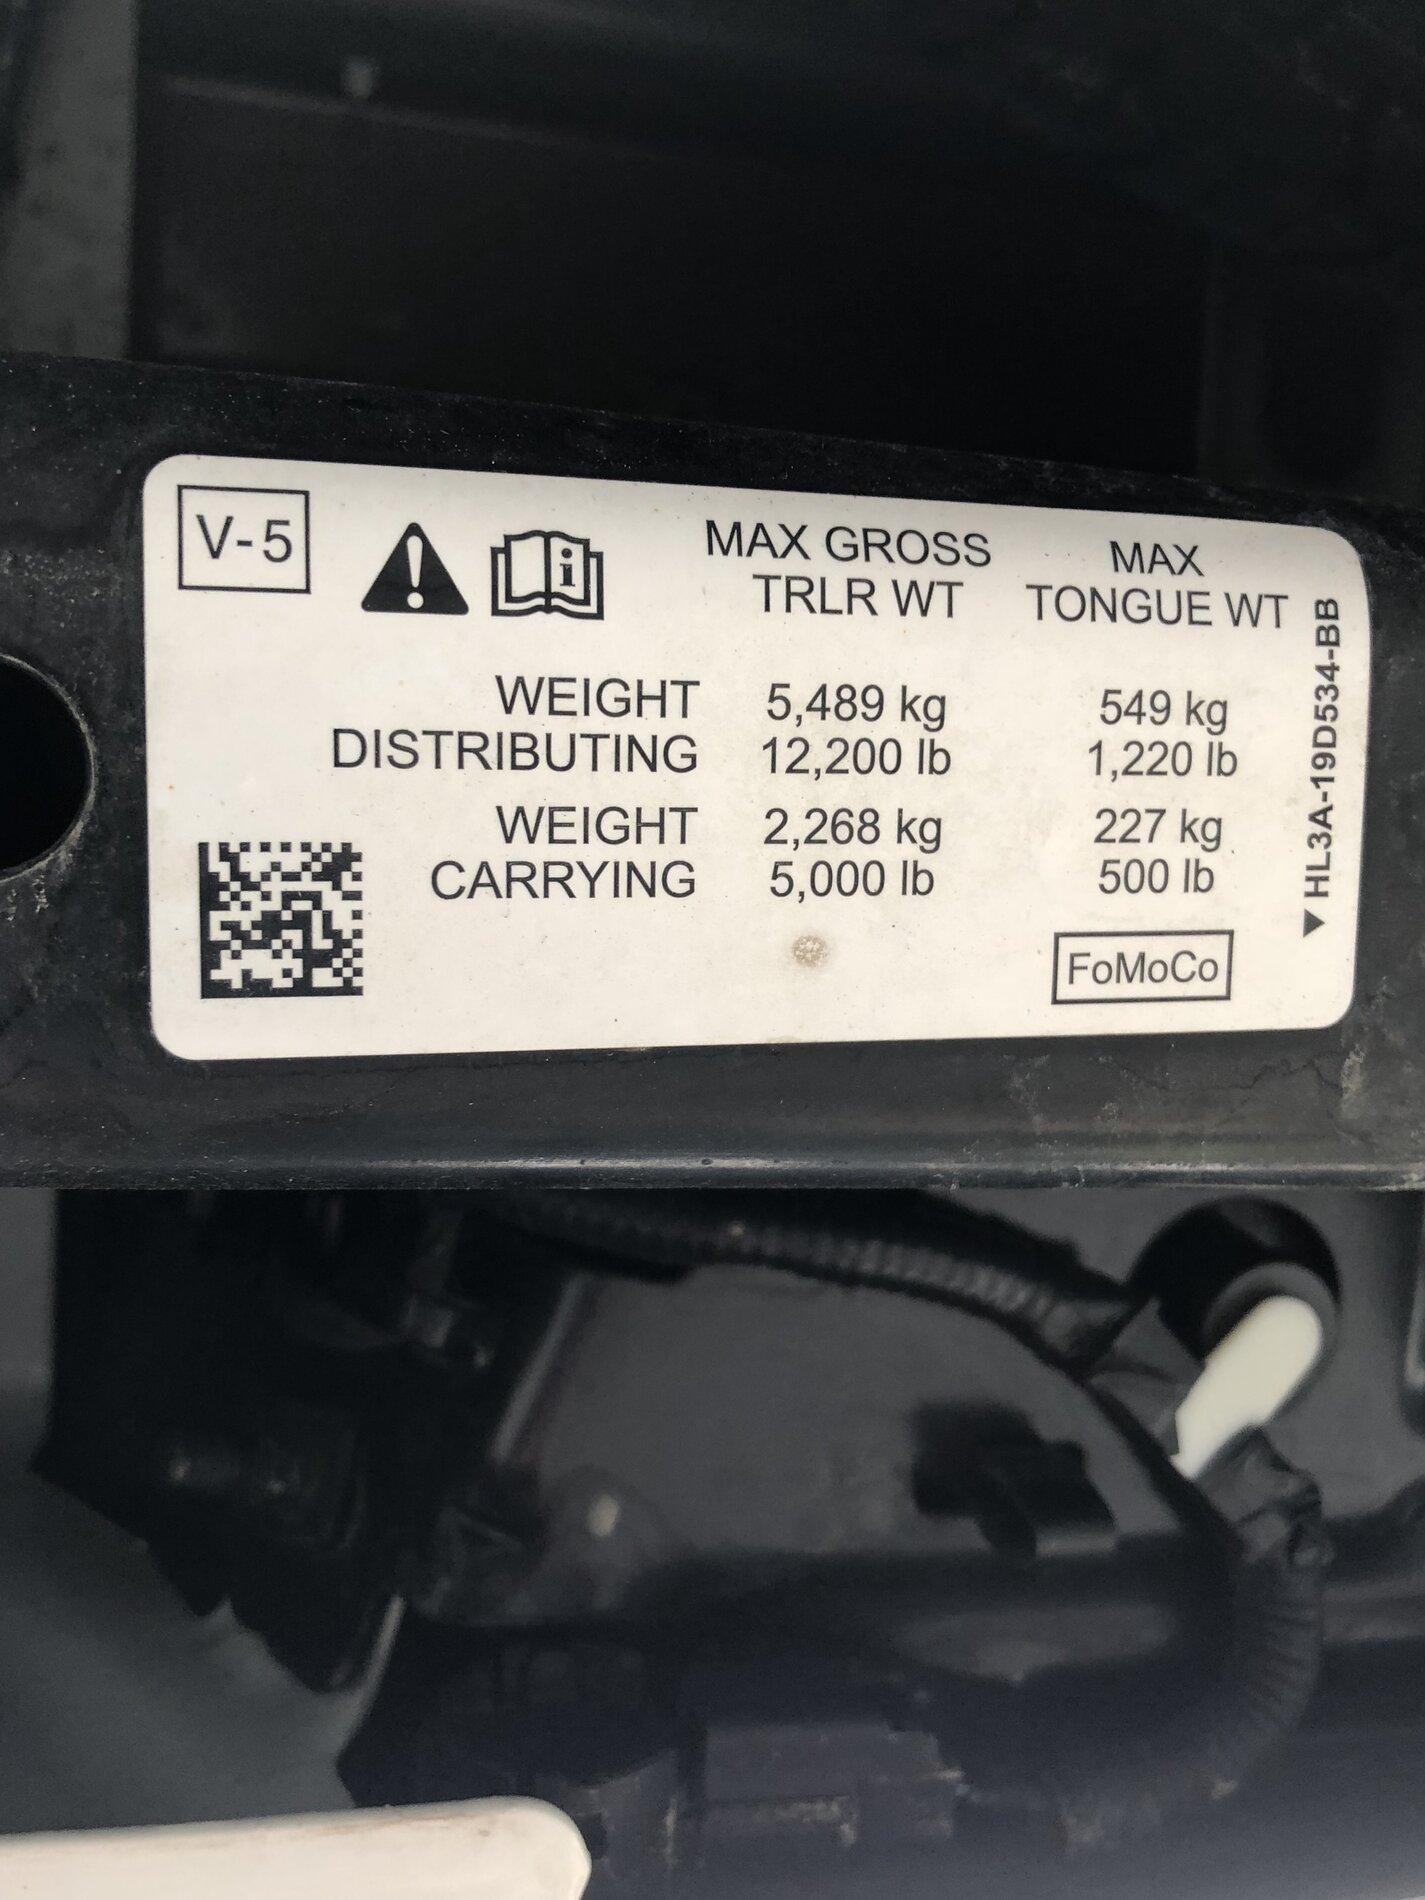 Ford F-150 Lightning 5,000 LB. max for warranty without tow package? 22926F95-DDAF-4CD8-97FC-7973E62AEE00